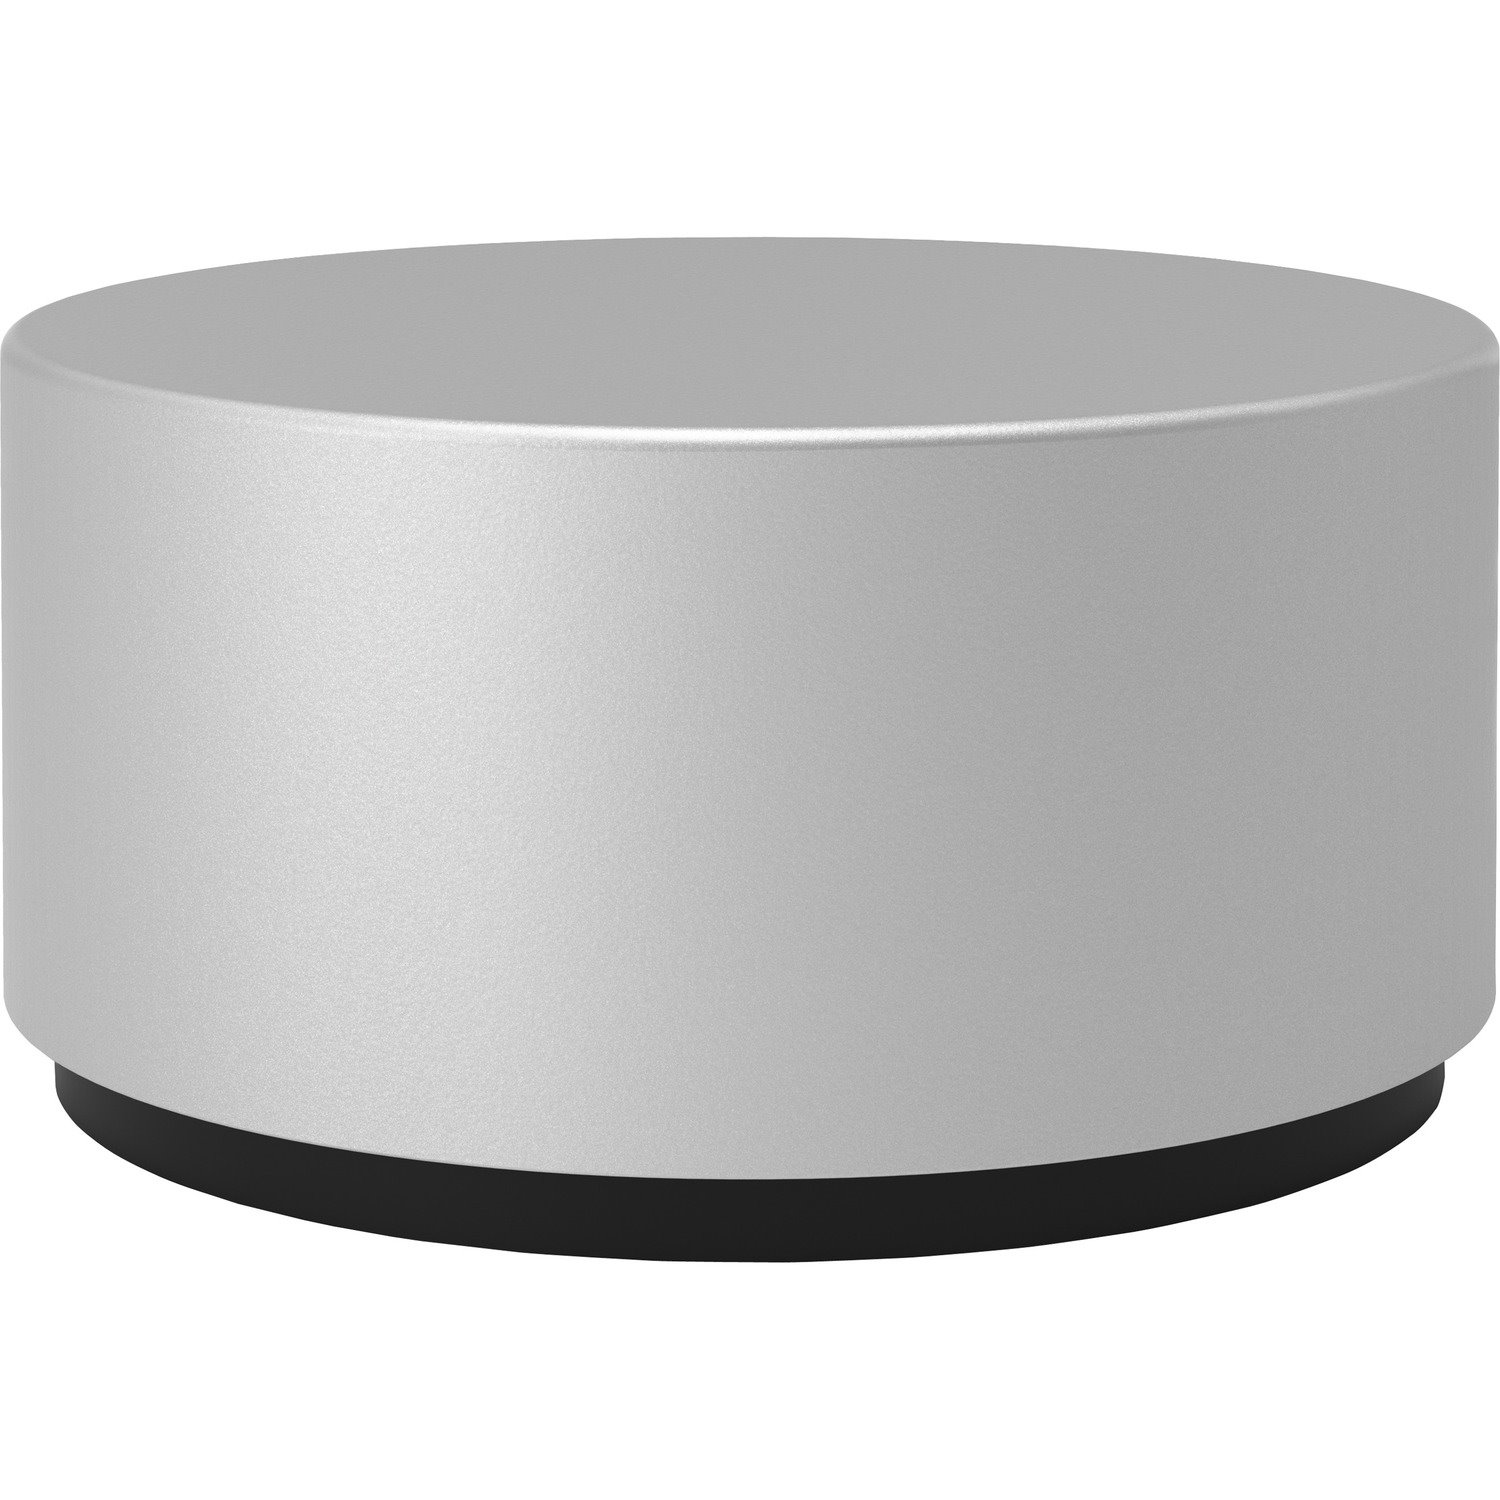 Microsoft Surface Dial 3D Input Device - Bluetooth - Magnesium